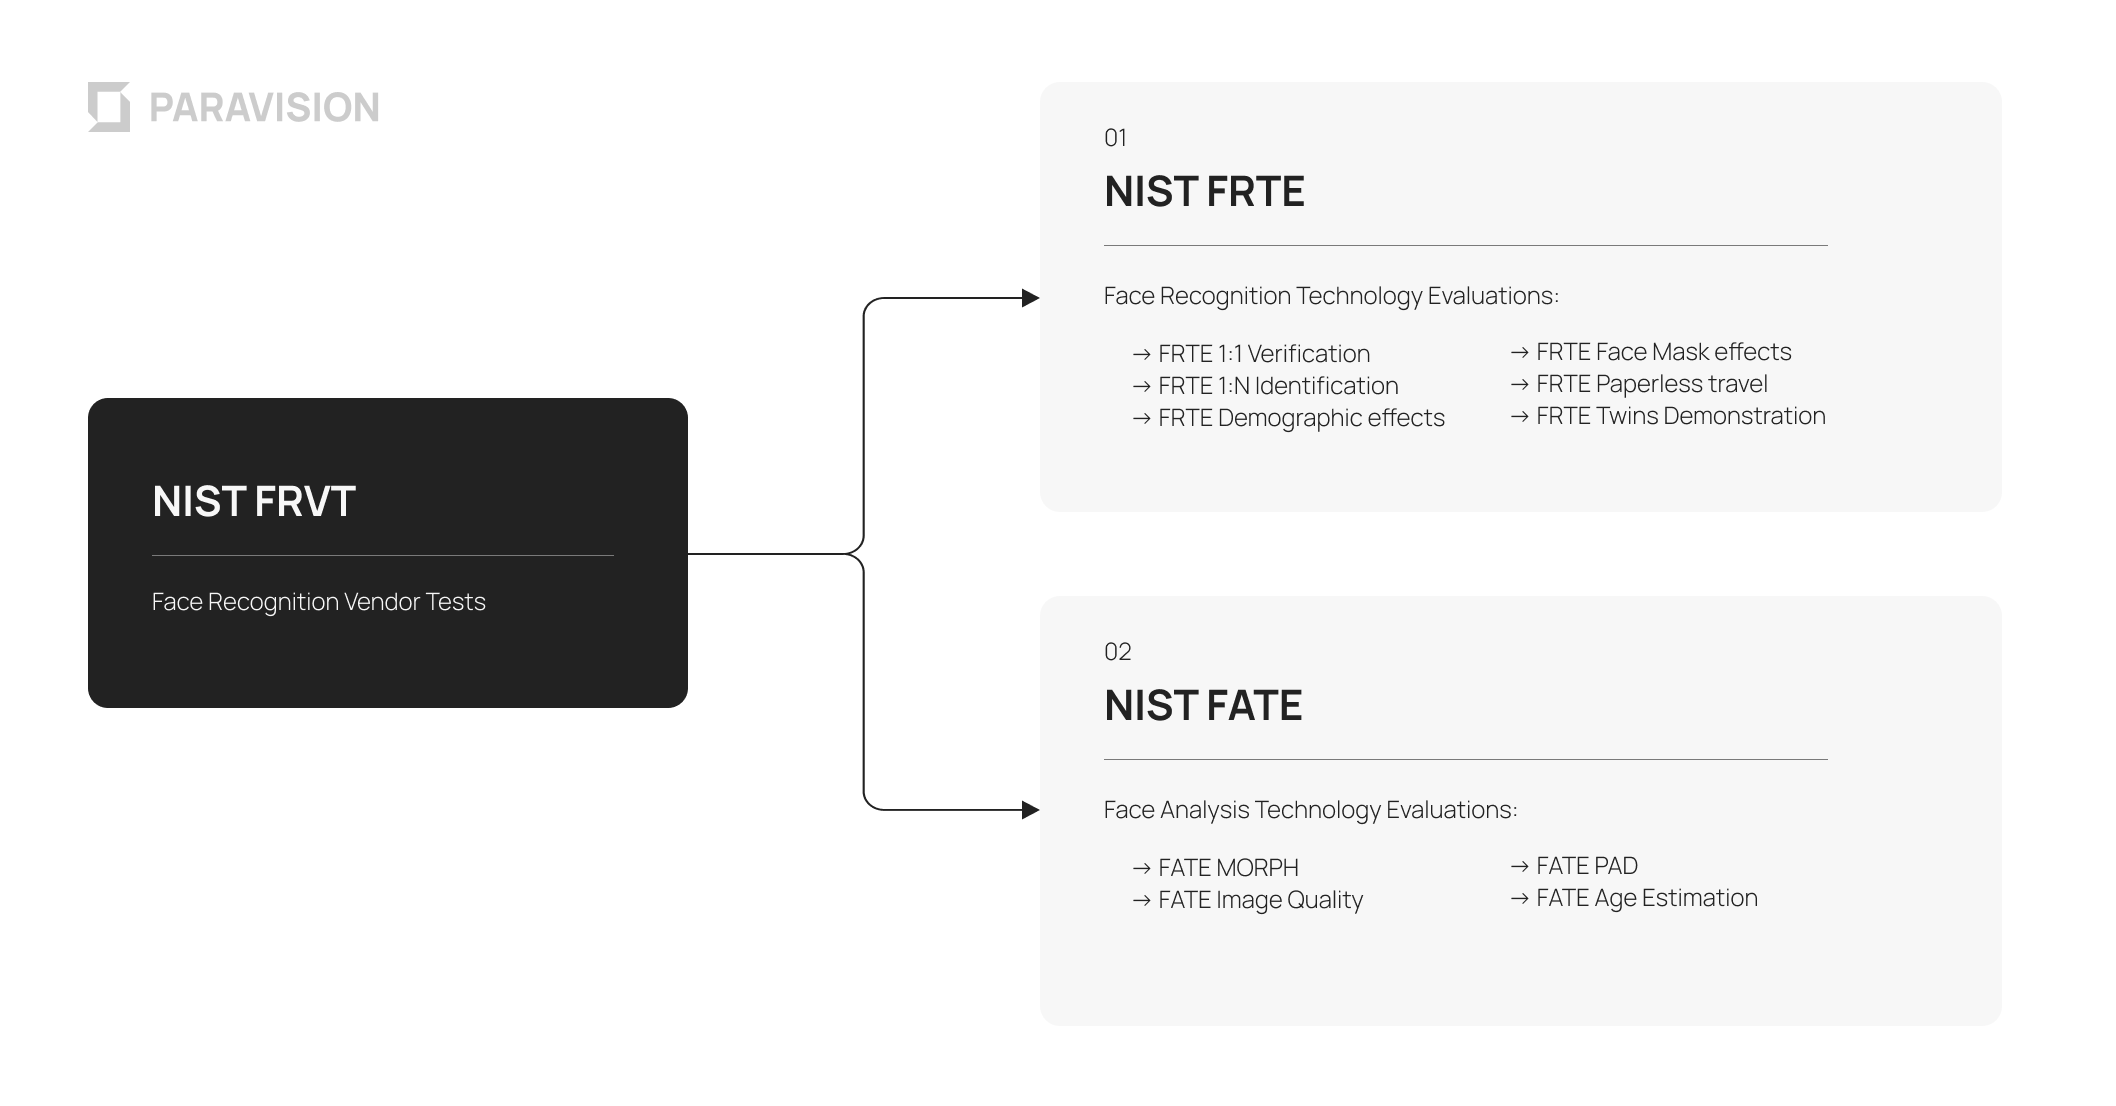 Graphic showcasing that NIST FRVT has been split into two new tests: NIST FRTE (Face Recognition Technology Evaluation) and NIST FATE (Face Analysis Technology Evaluation).